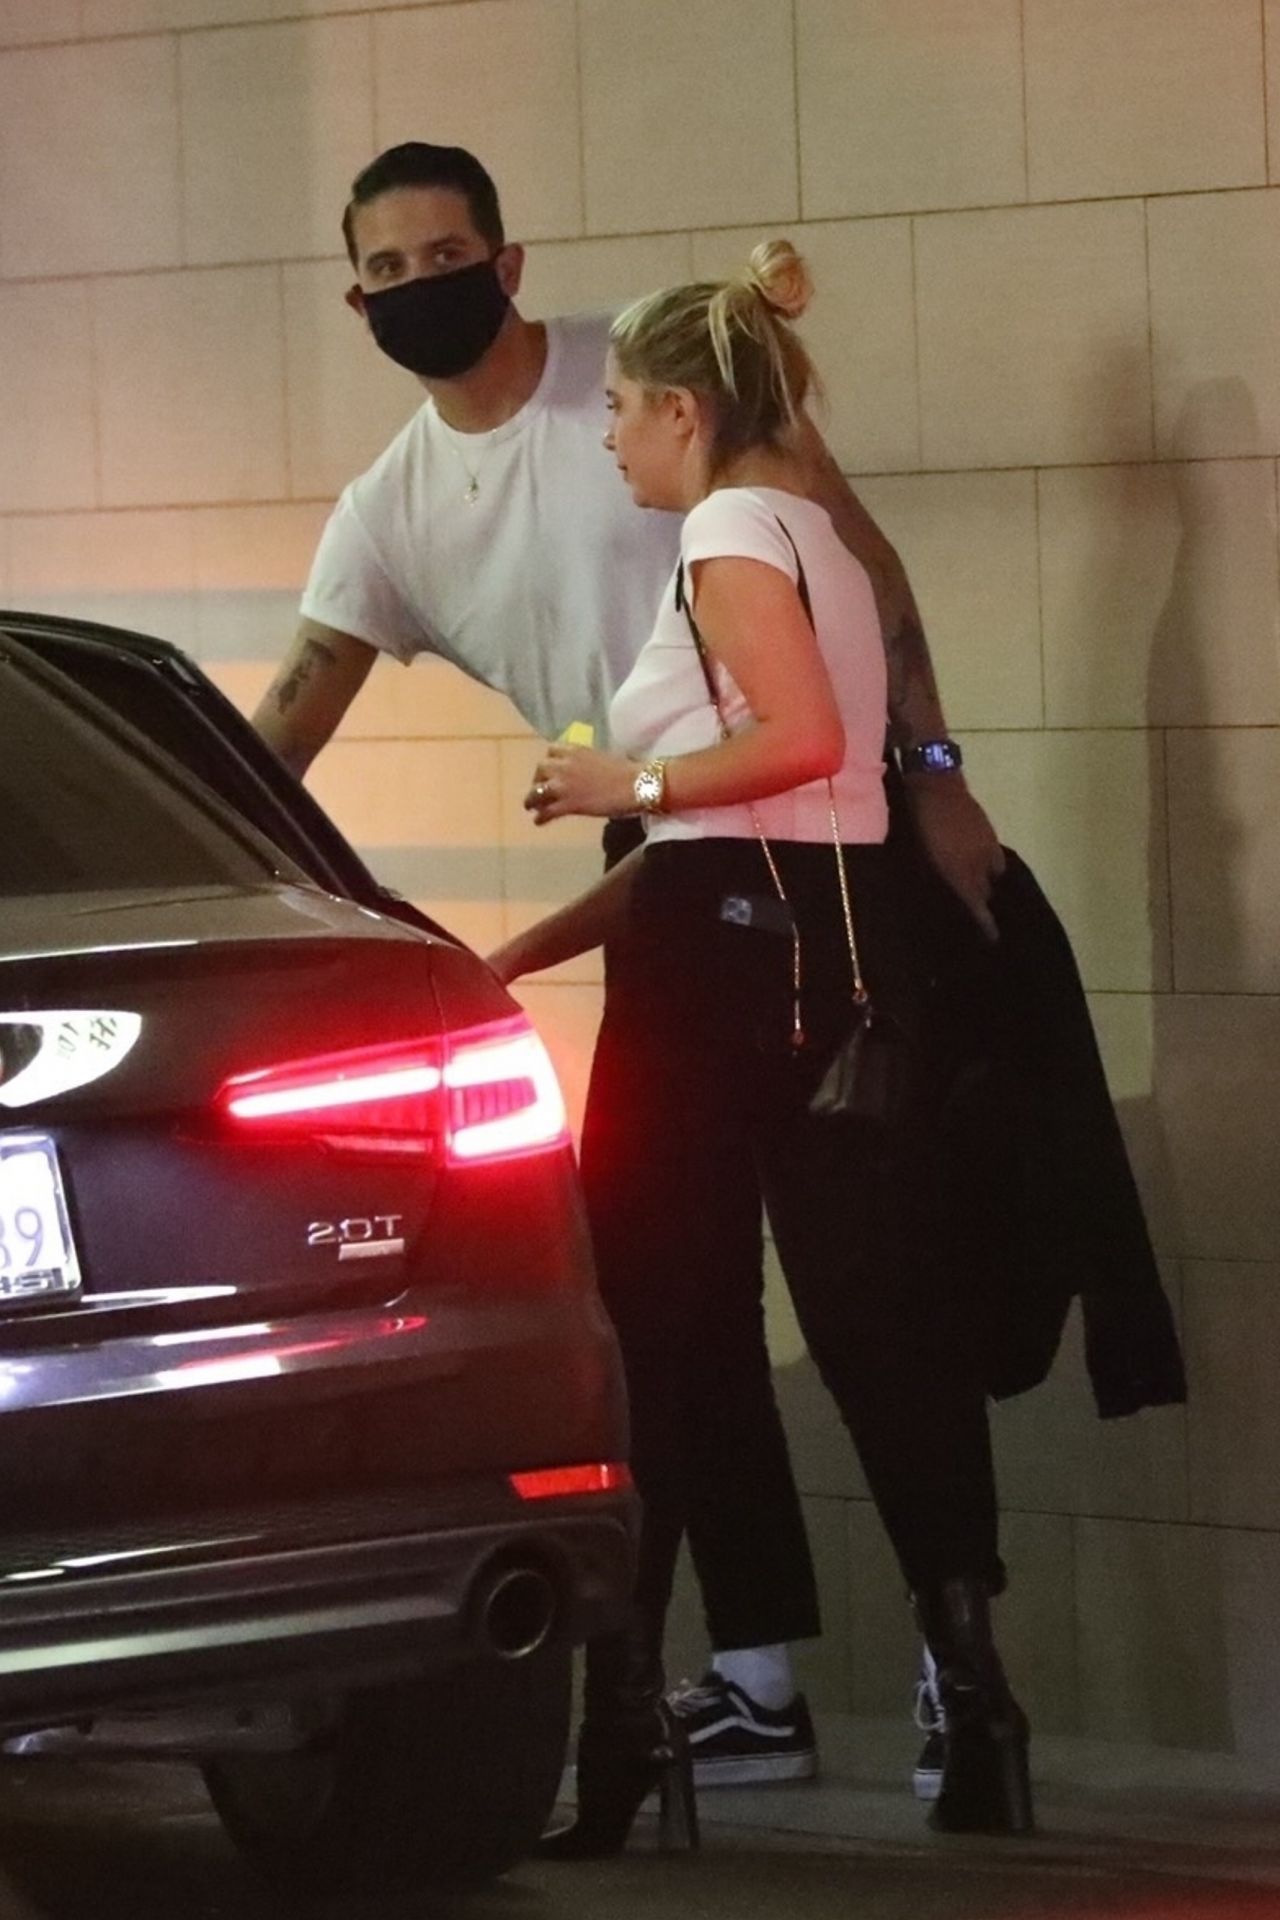 ashley-benson-out-to-dinner-with-boyfriend-g-eazy-in-la-08-19-2020-2.jpg